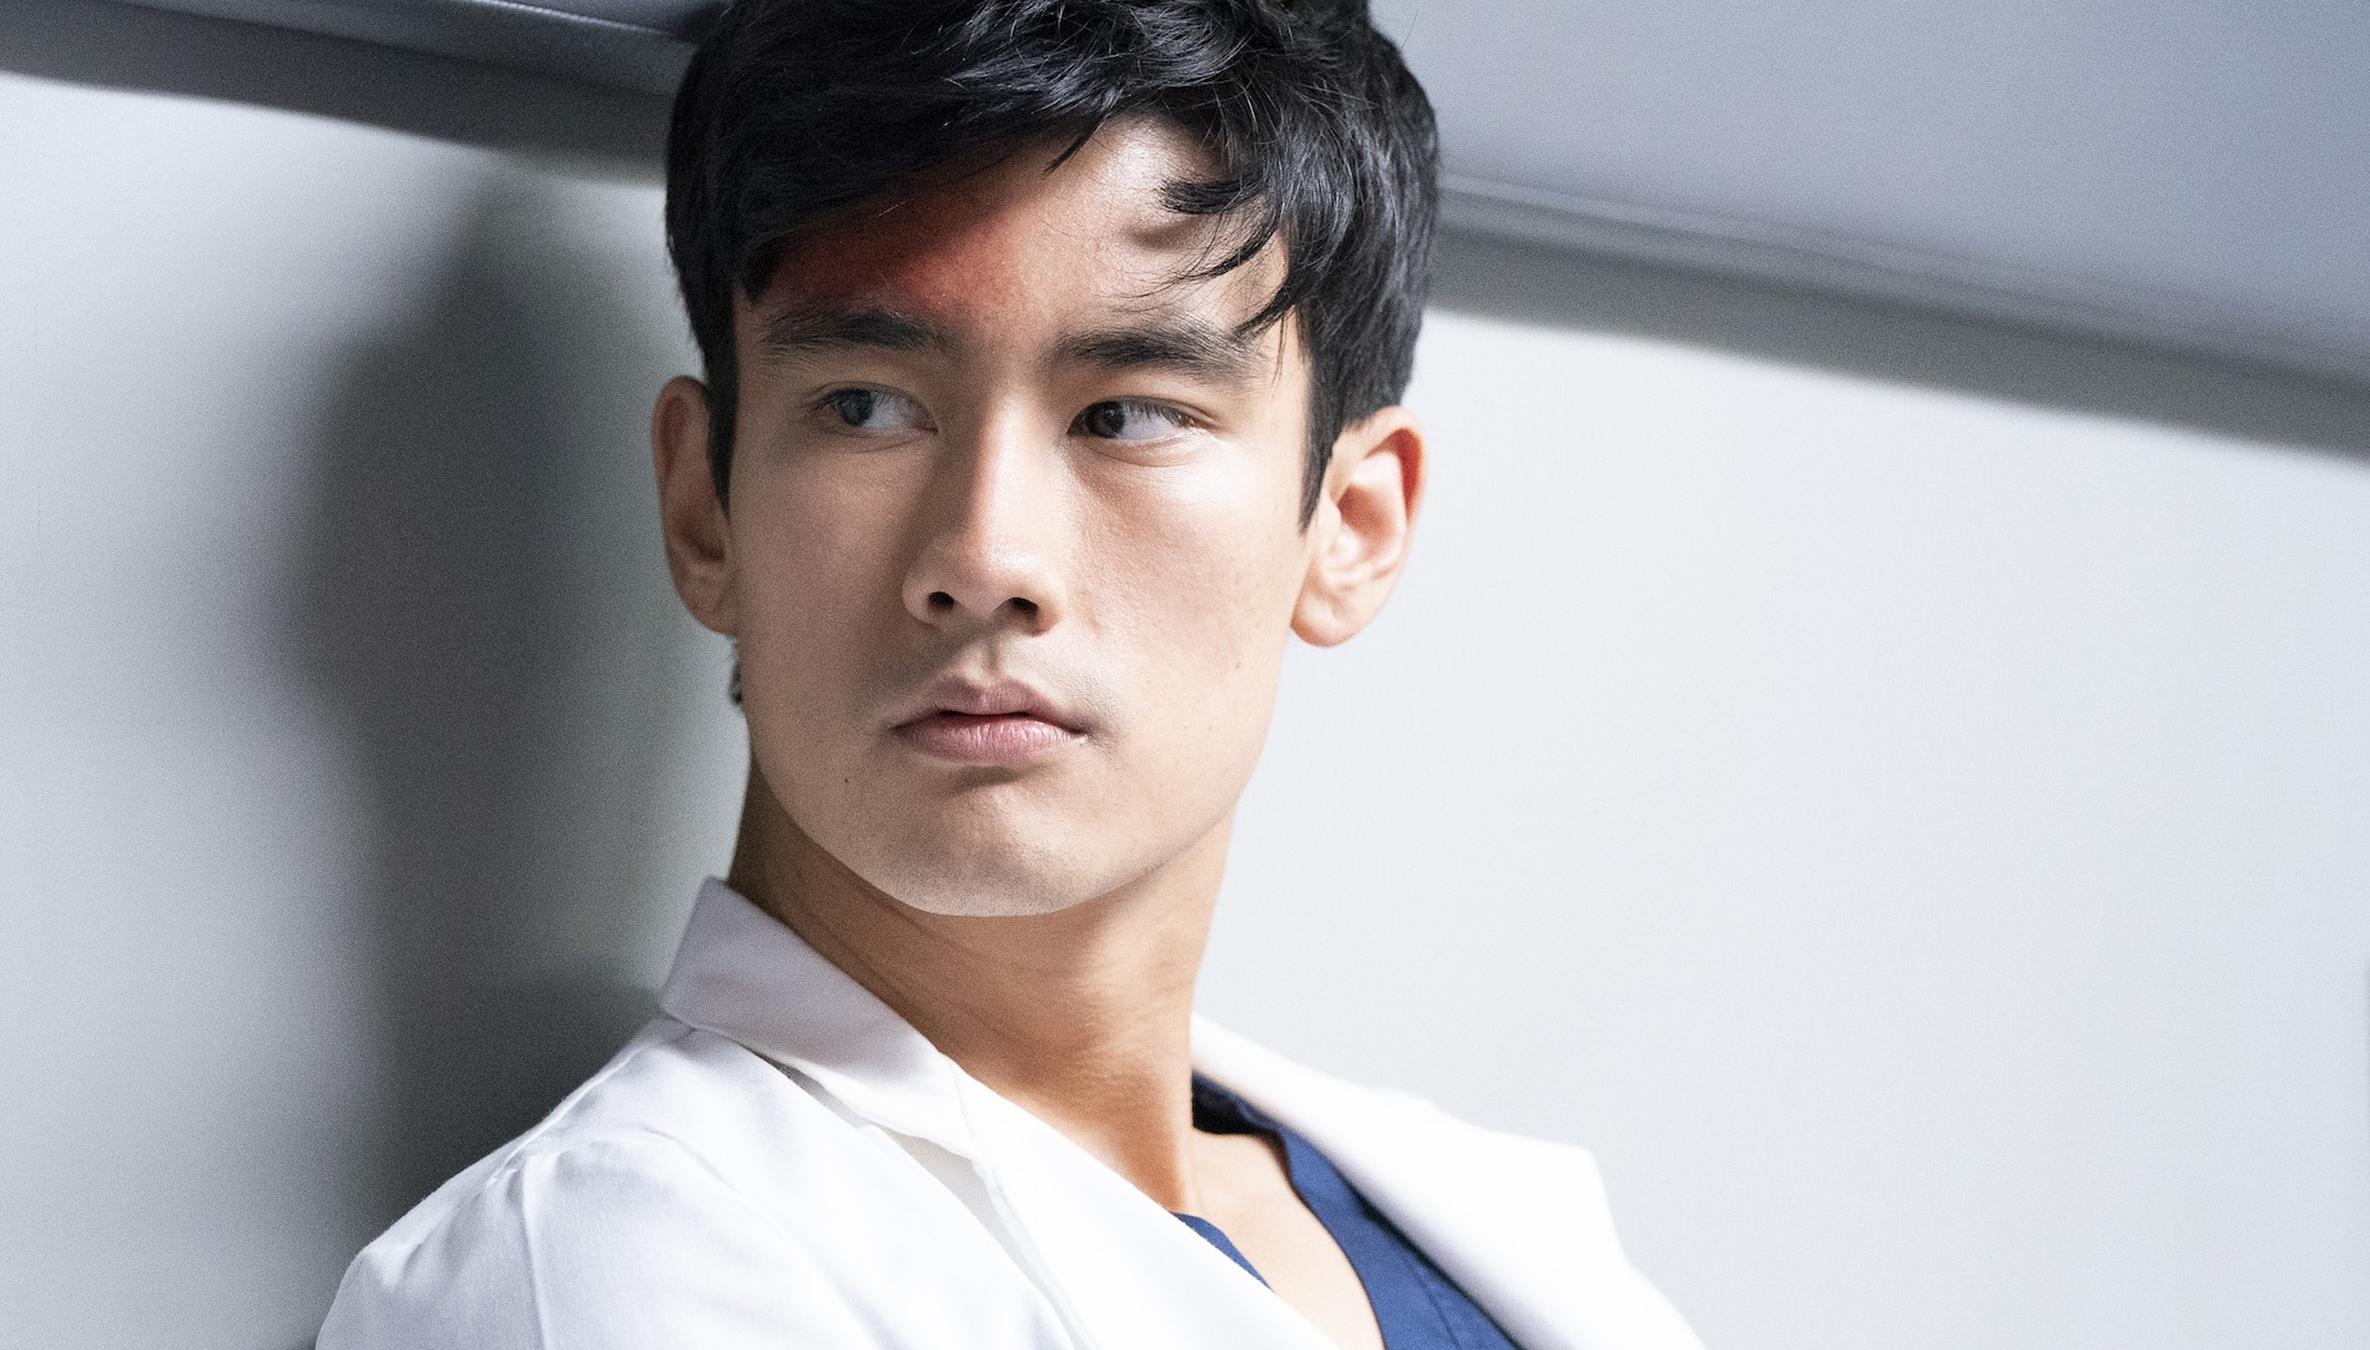 How Alex Landi Became an Actor on 'Grey's Anatomy'